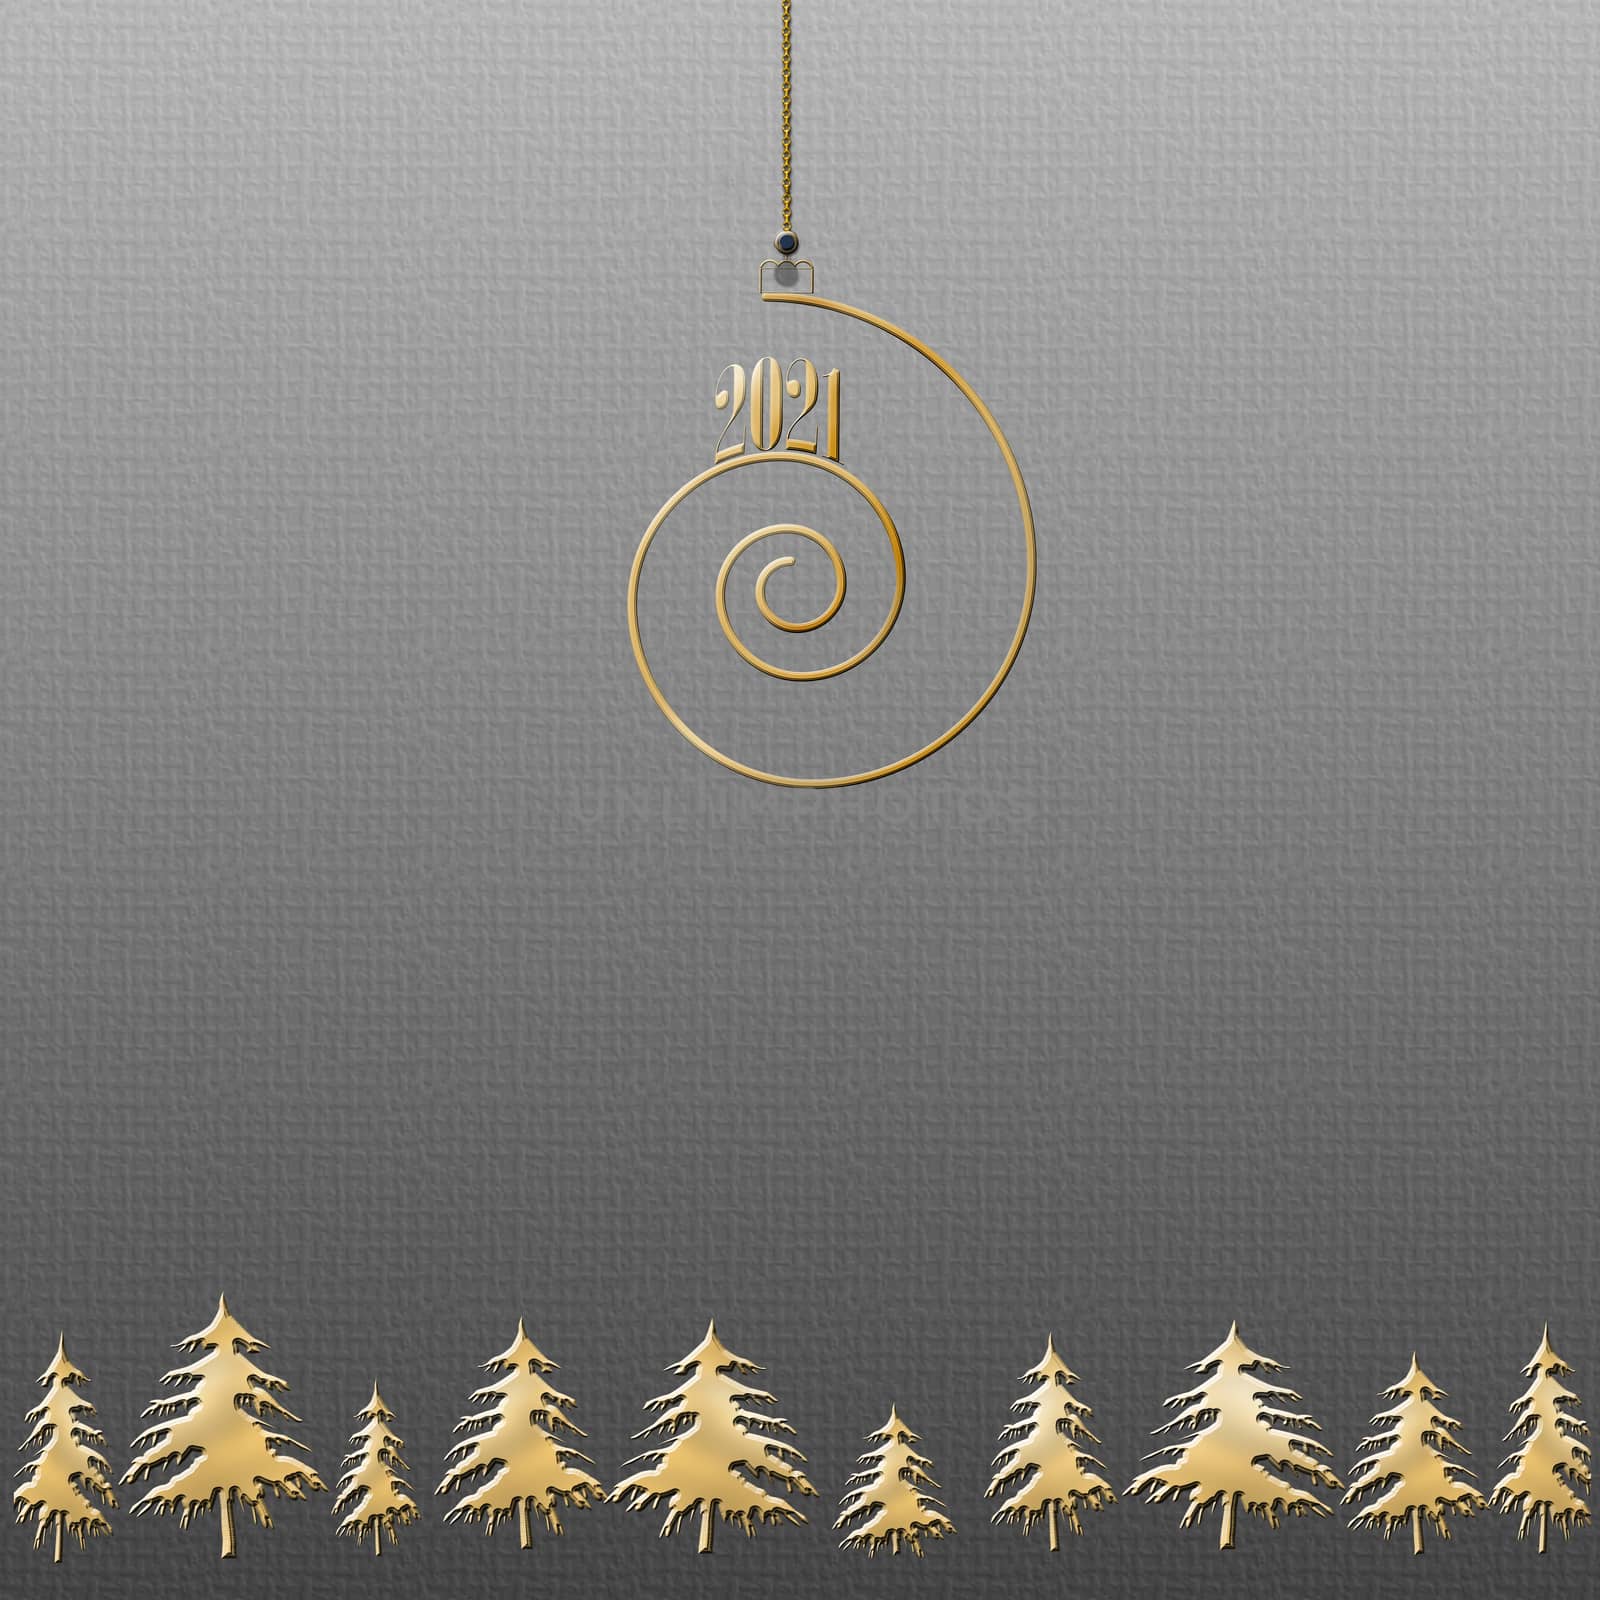 2021 Merry Christmas happy new year gold spiral shape on black background by NelliPolk